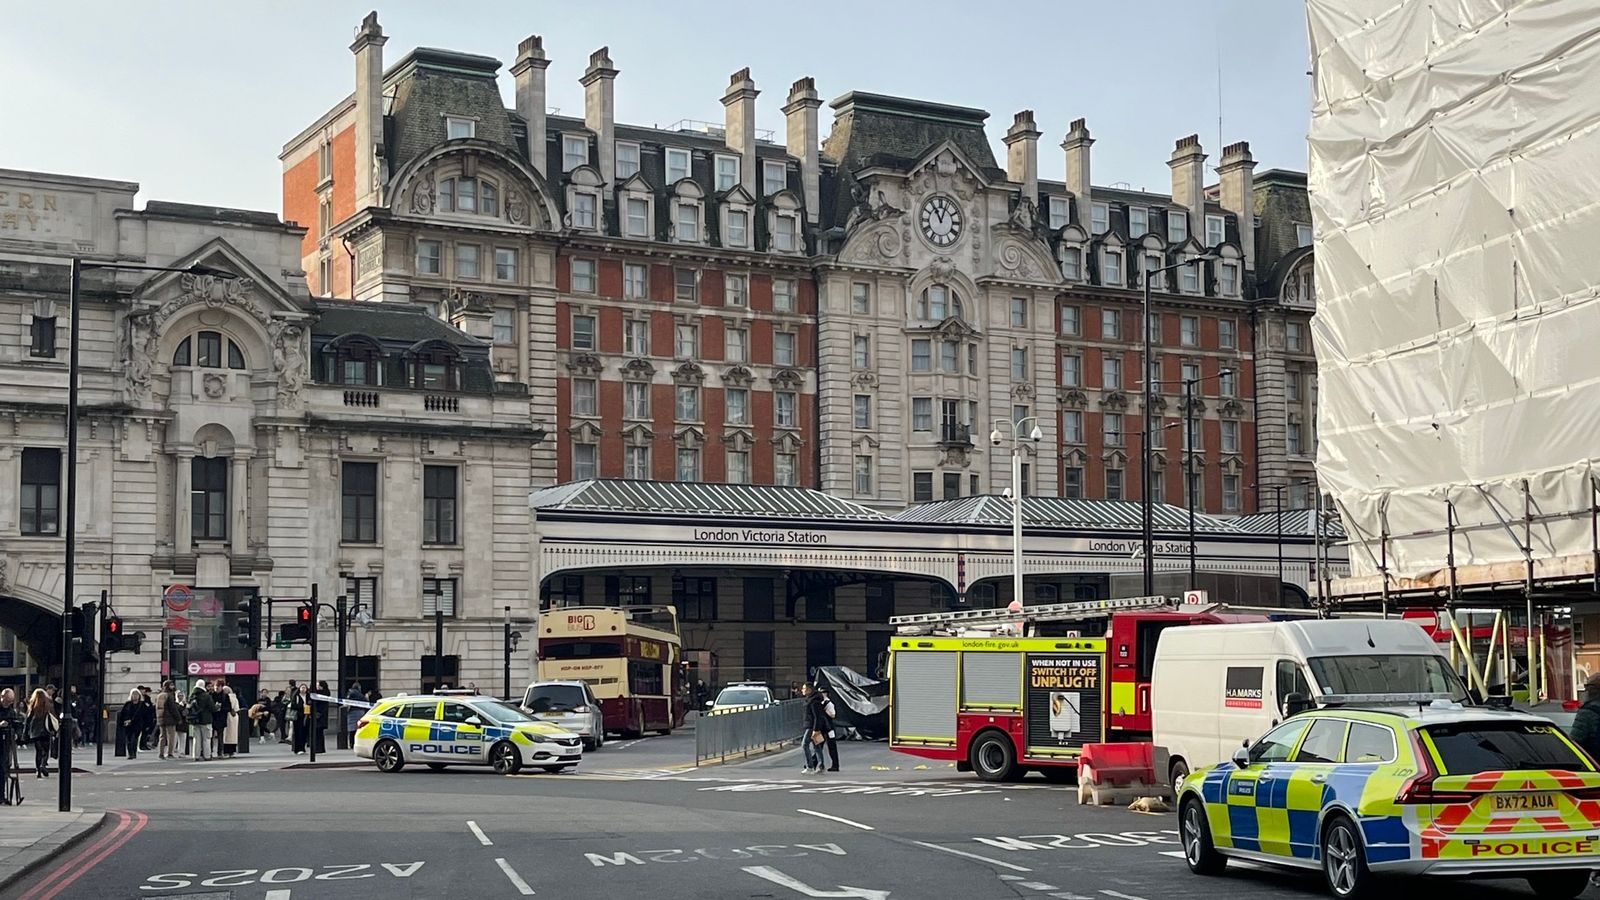 Pedestrian dies after being hit by bus outside London Victoria bus station 